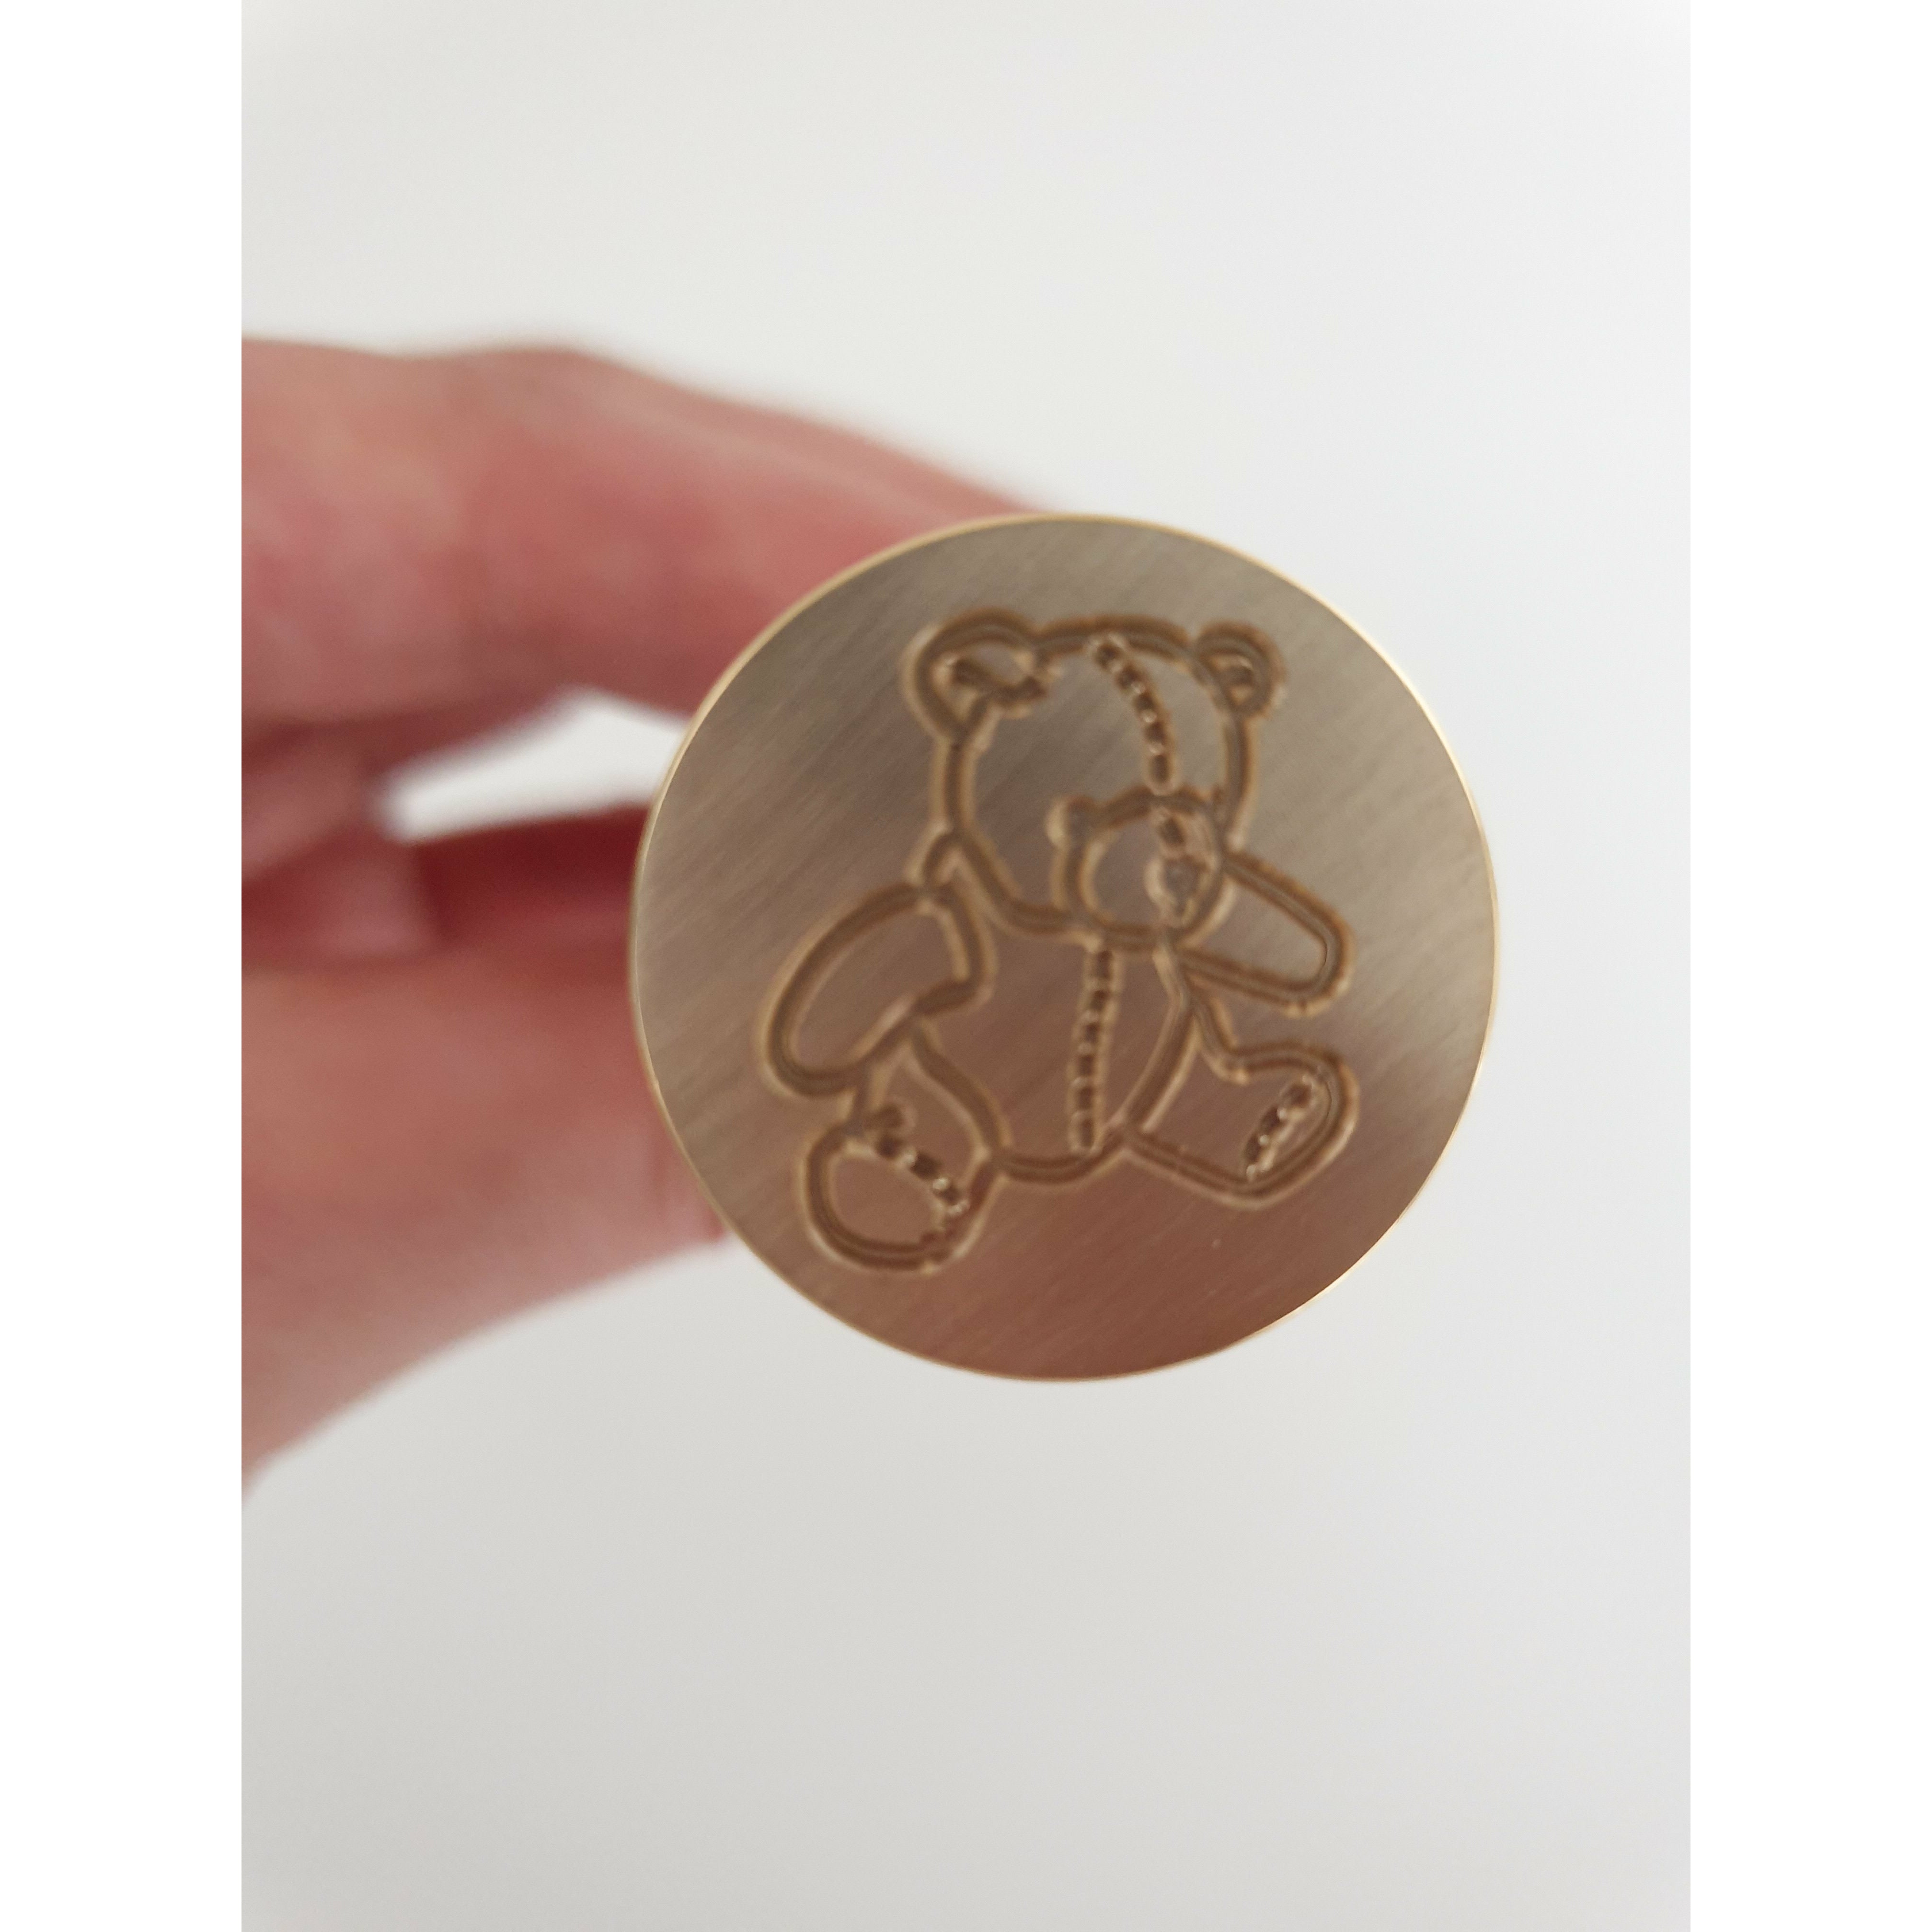 Ready Made Wax Seal Stamp - US Army Symbol Wax Seal Stamp